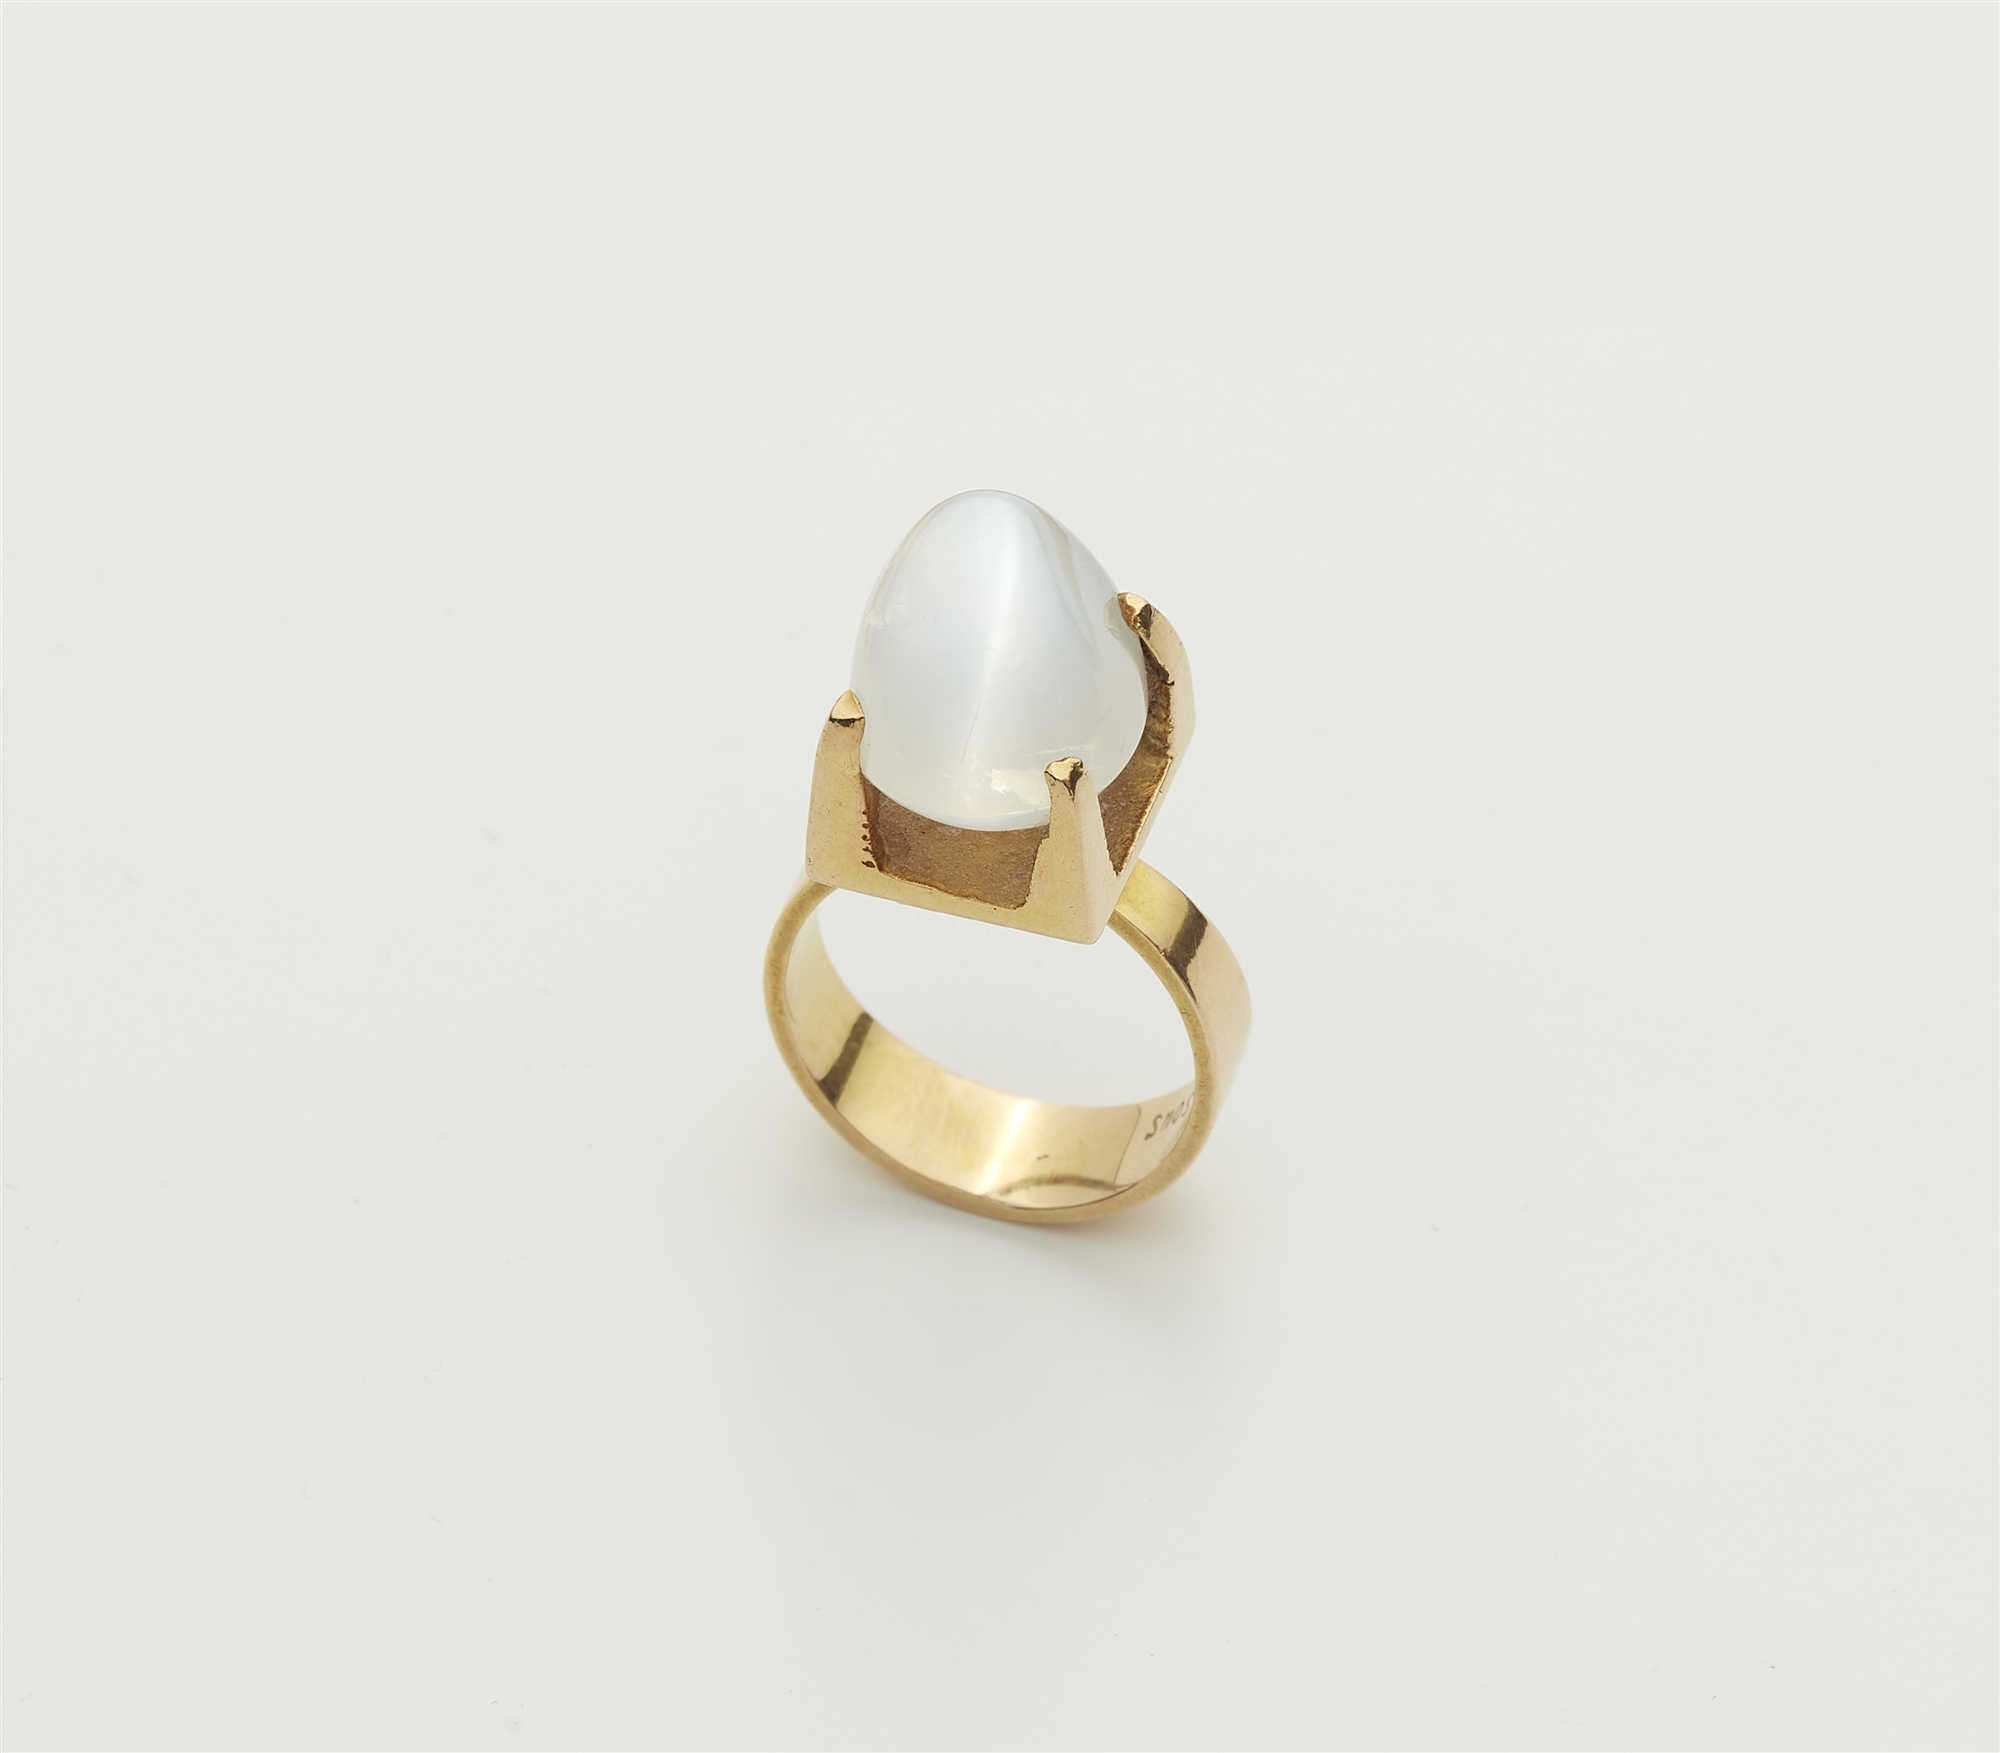 A German 18k gold and sugarloaf-cut moonstone ring.